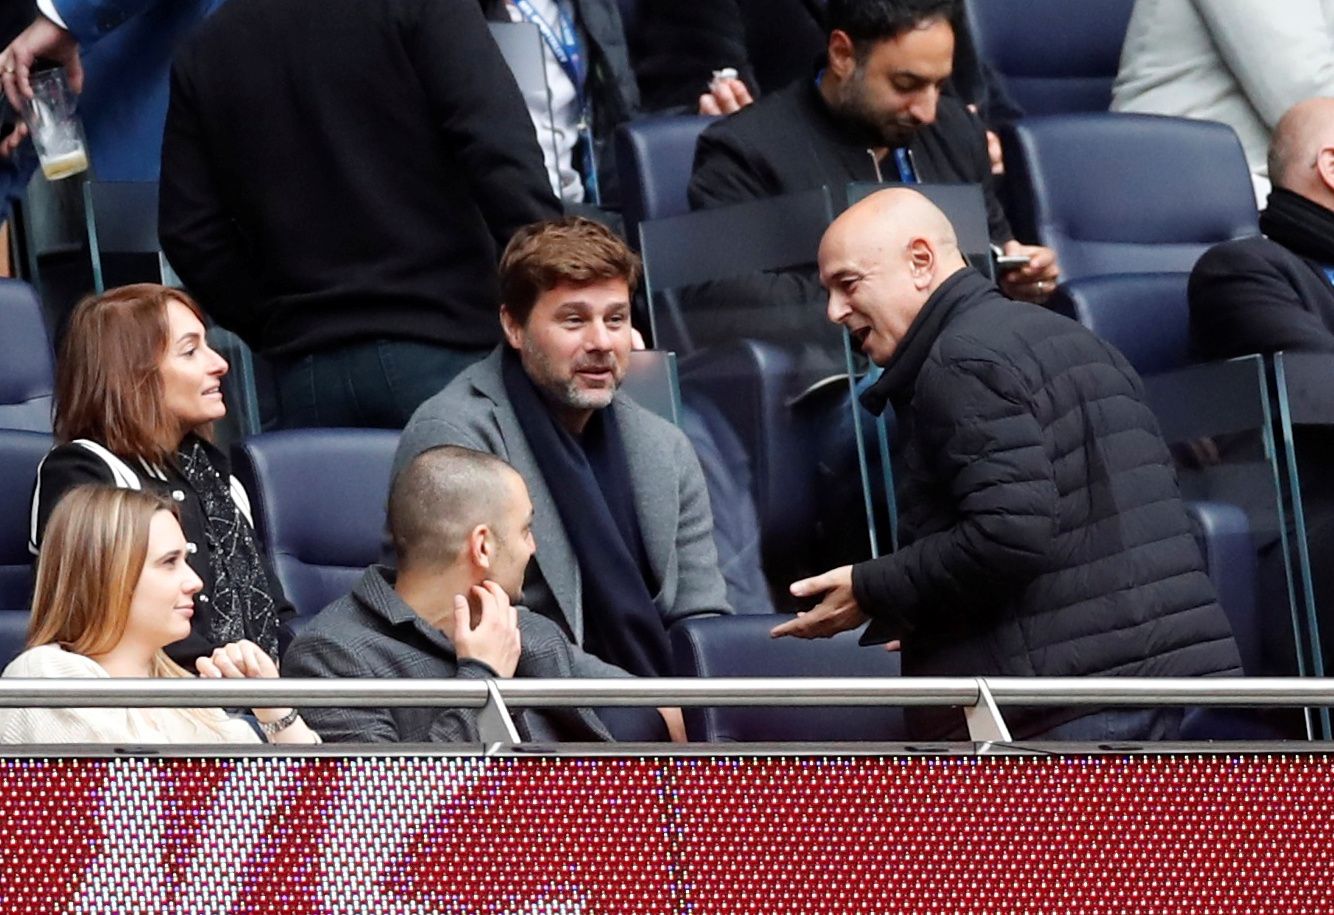 NFL Football - Carolina Panthers v Tampa Bay Buccaneers - NFL International Series - Tottenham Hotspur Stadium, London, Britain - October 13, 2019  Tottenham Hotspur chairman Daniel Levy and Tottenham Hotspur manager Mauricio Pochettino in the stands during the match  Action Images via Reuters/Andrew Boyers